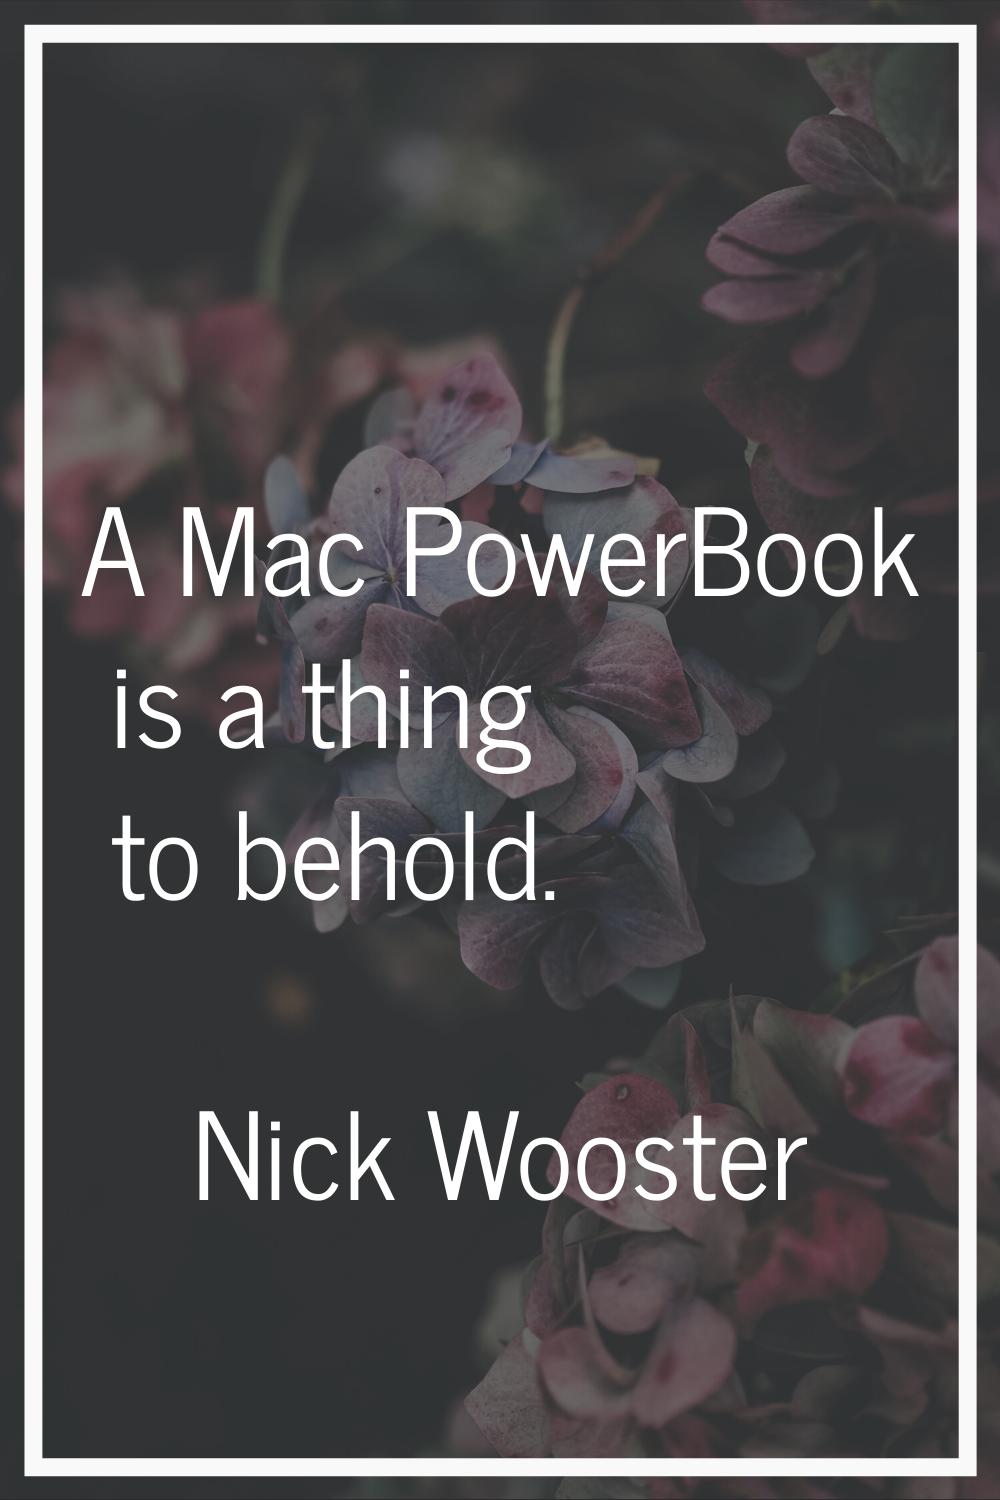 A Mac PowerBook is a thing to behold.